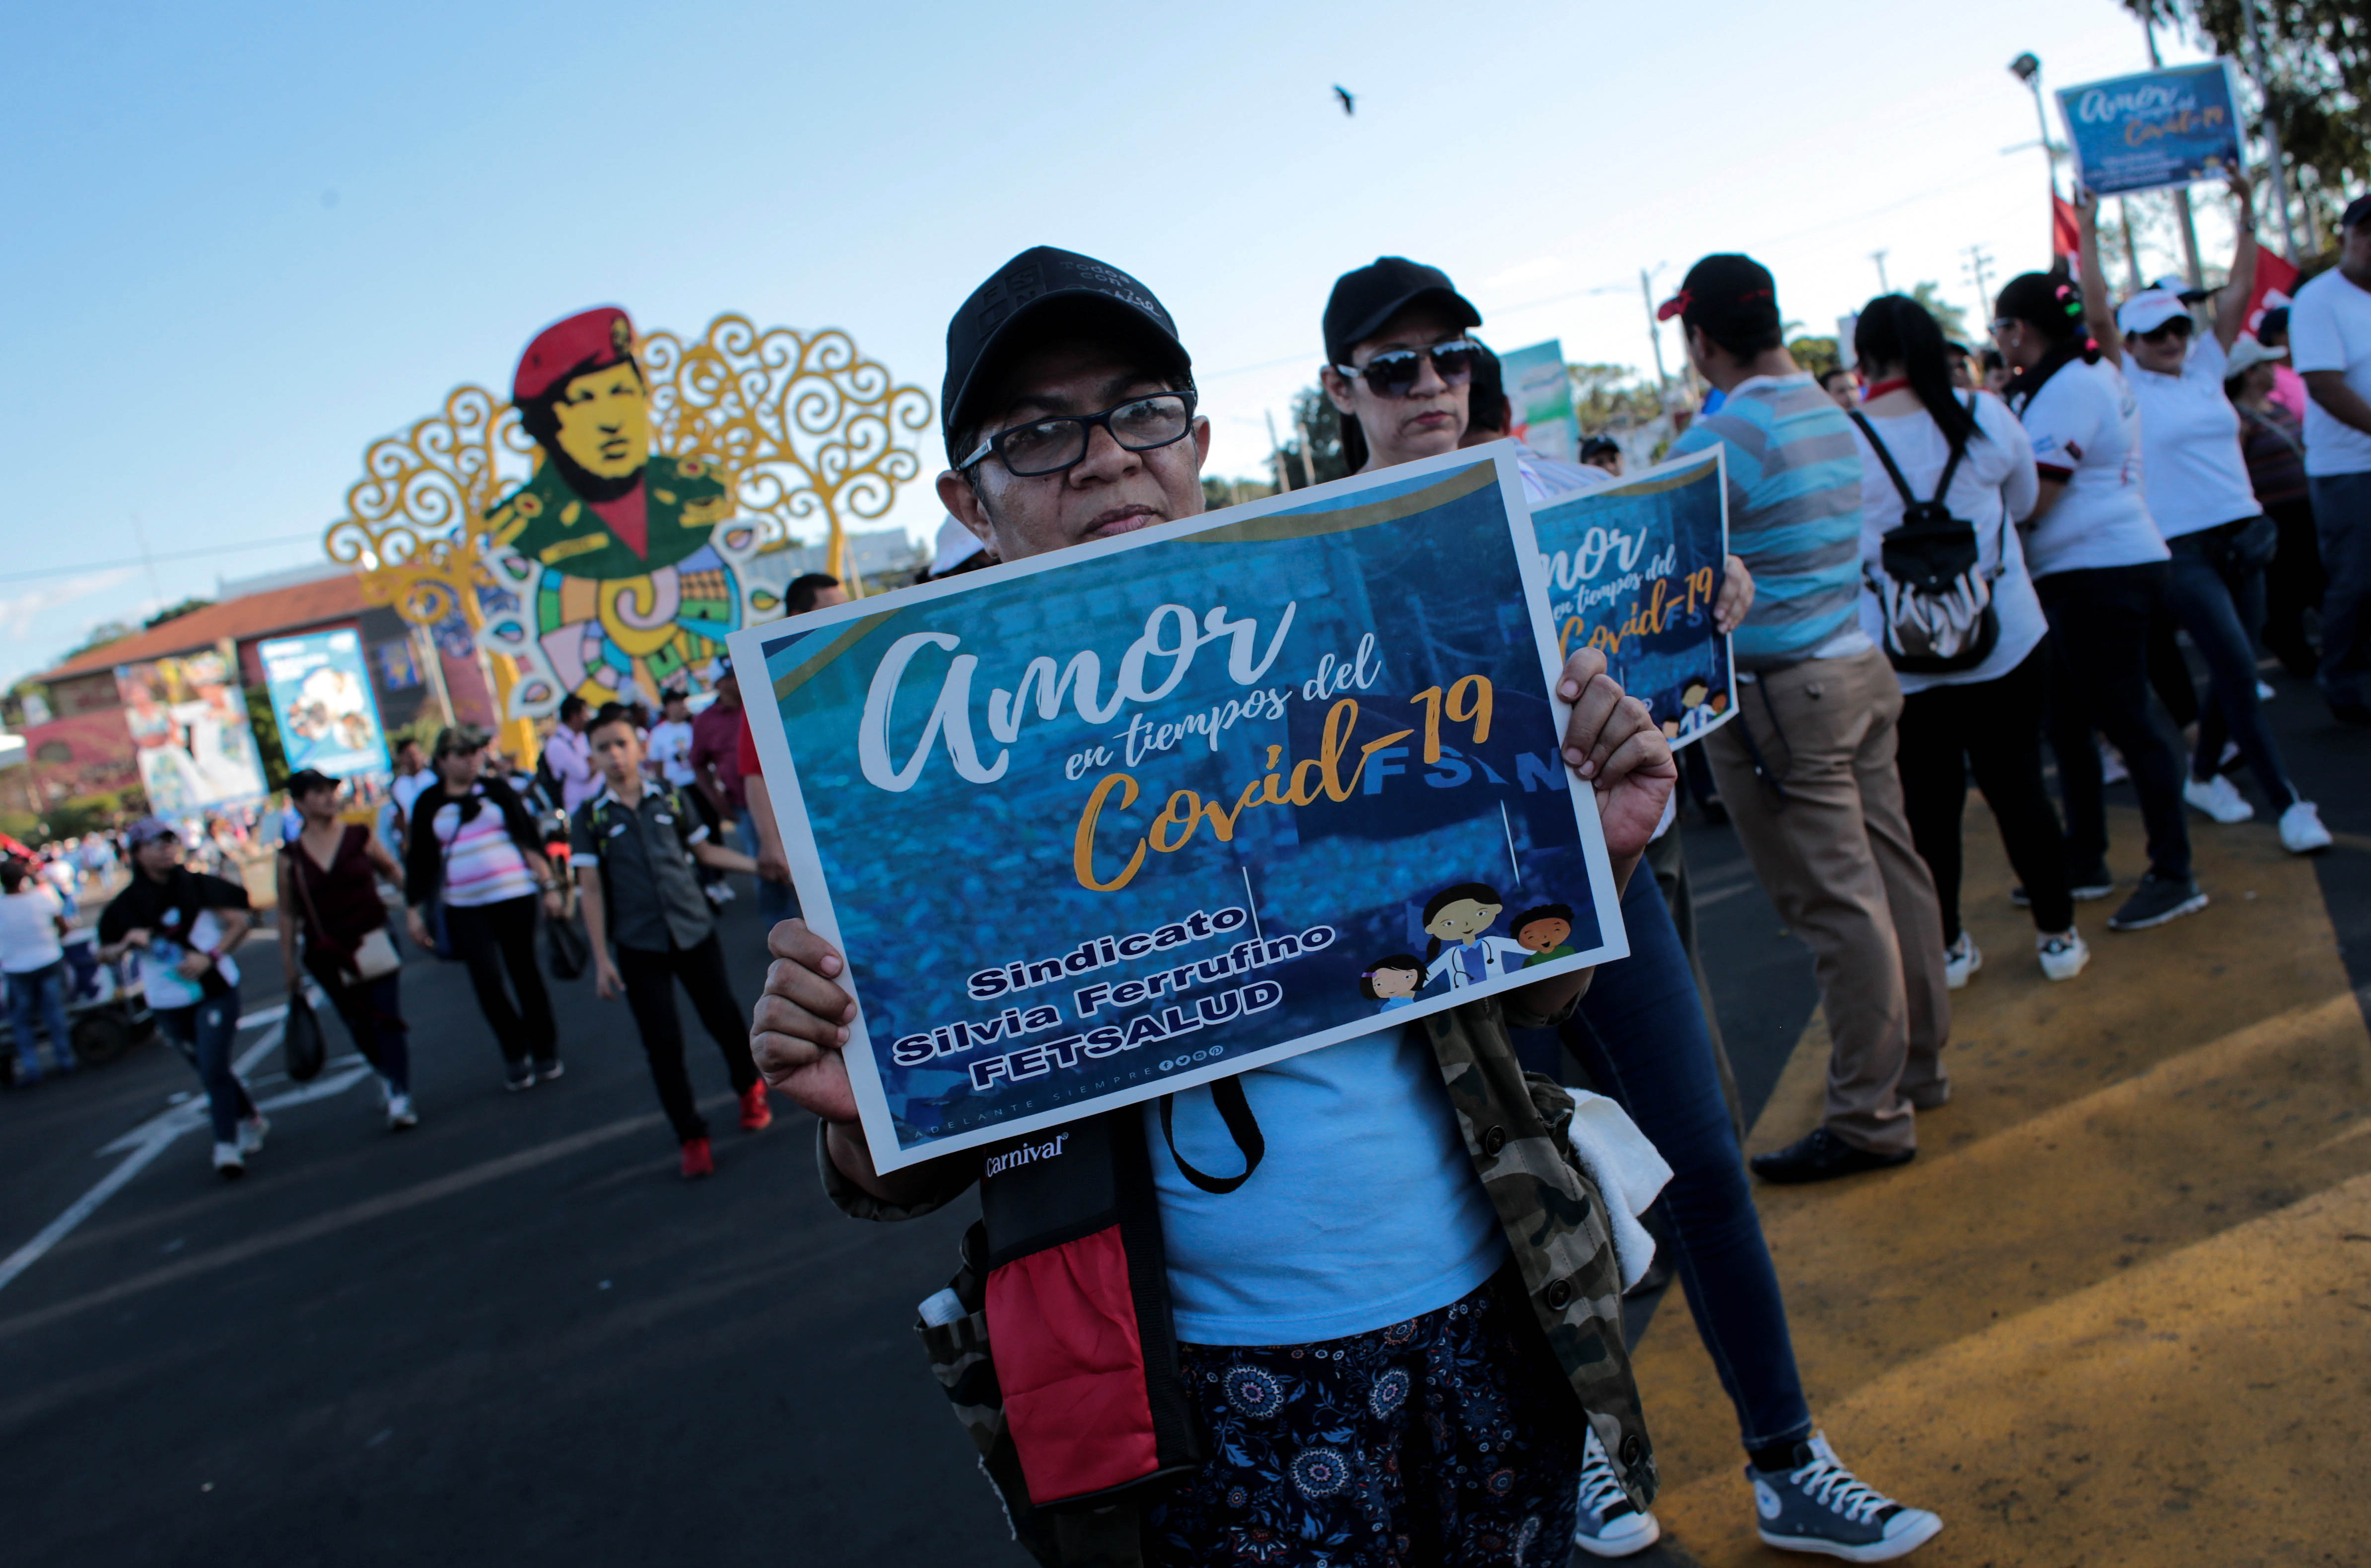 A woman holds a sign that reads "Love in Times of Covid-19" during a government-sponsored march in Managua, Nicaragua, on March 14, 2020.